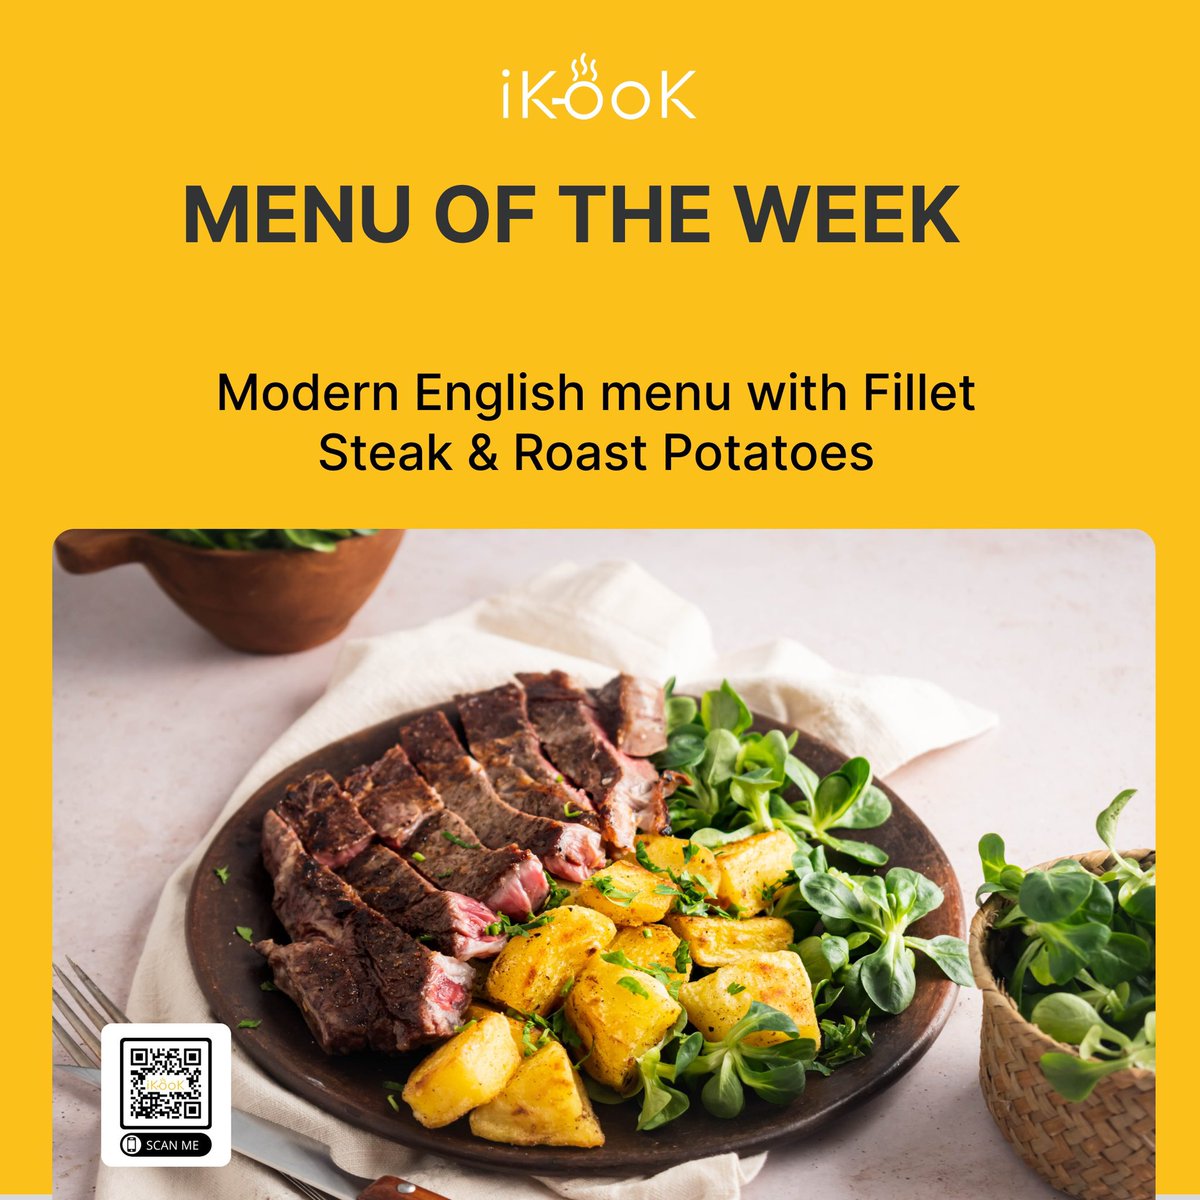 Our menu of the week is a Modern English menu with Fillet Steak & Roast Potatoes 

To book this menu visit our website Ikook.co.uk 

#privatechef #privatecheflondon #homedining #homechef #homecook #homecooking #chefathome #chefforhire #ukfoodies #foodclub